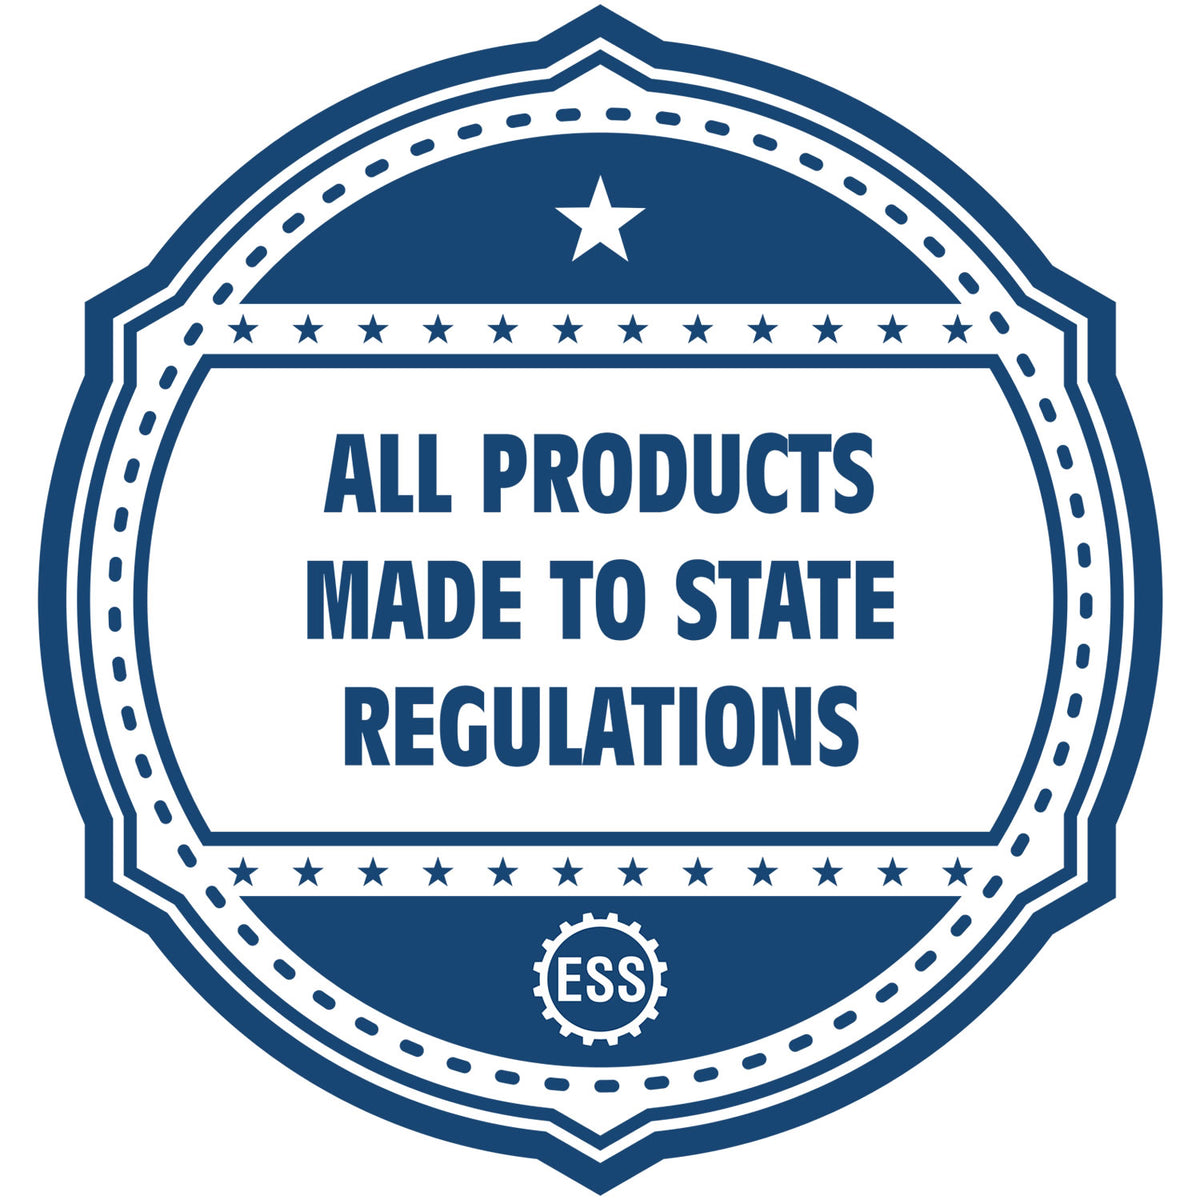 An icon or badge element for the Soft Virginia Professional Engineer Seal showing that this product is made in compliance with state regulations.